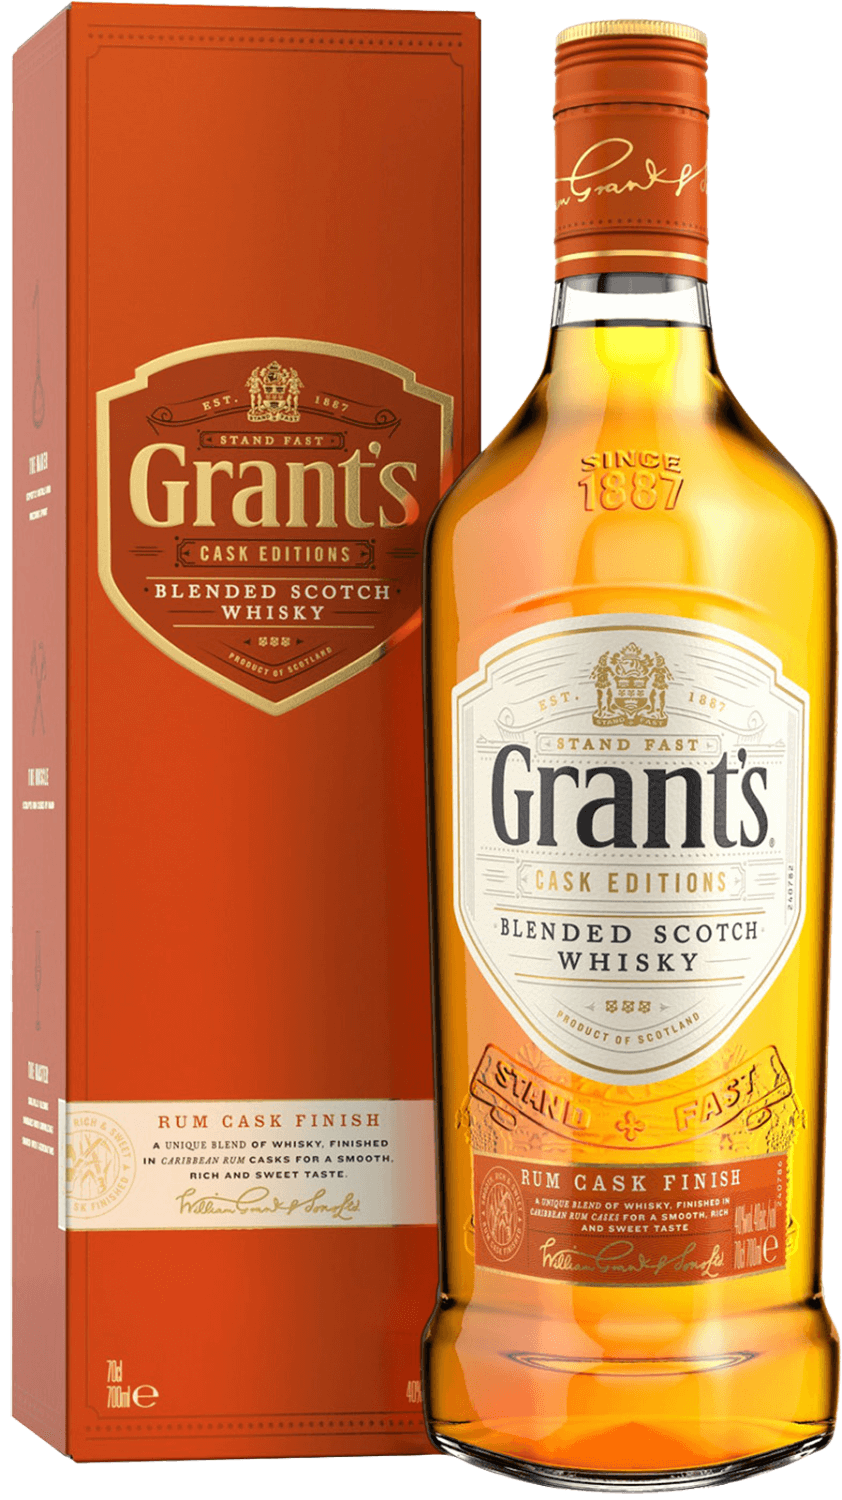 Grant's Ale Cask Finish Blended Scotch Whisky (gift box) grant s ale cask finish blended scotch whisky gift box